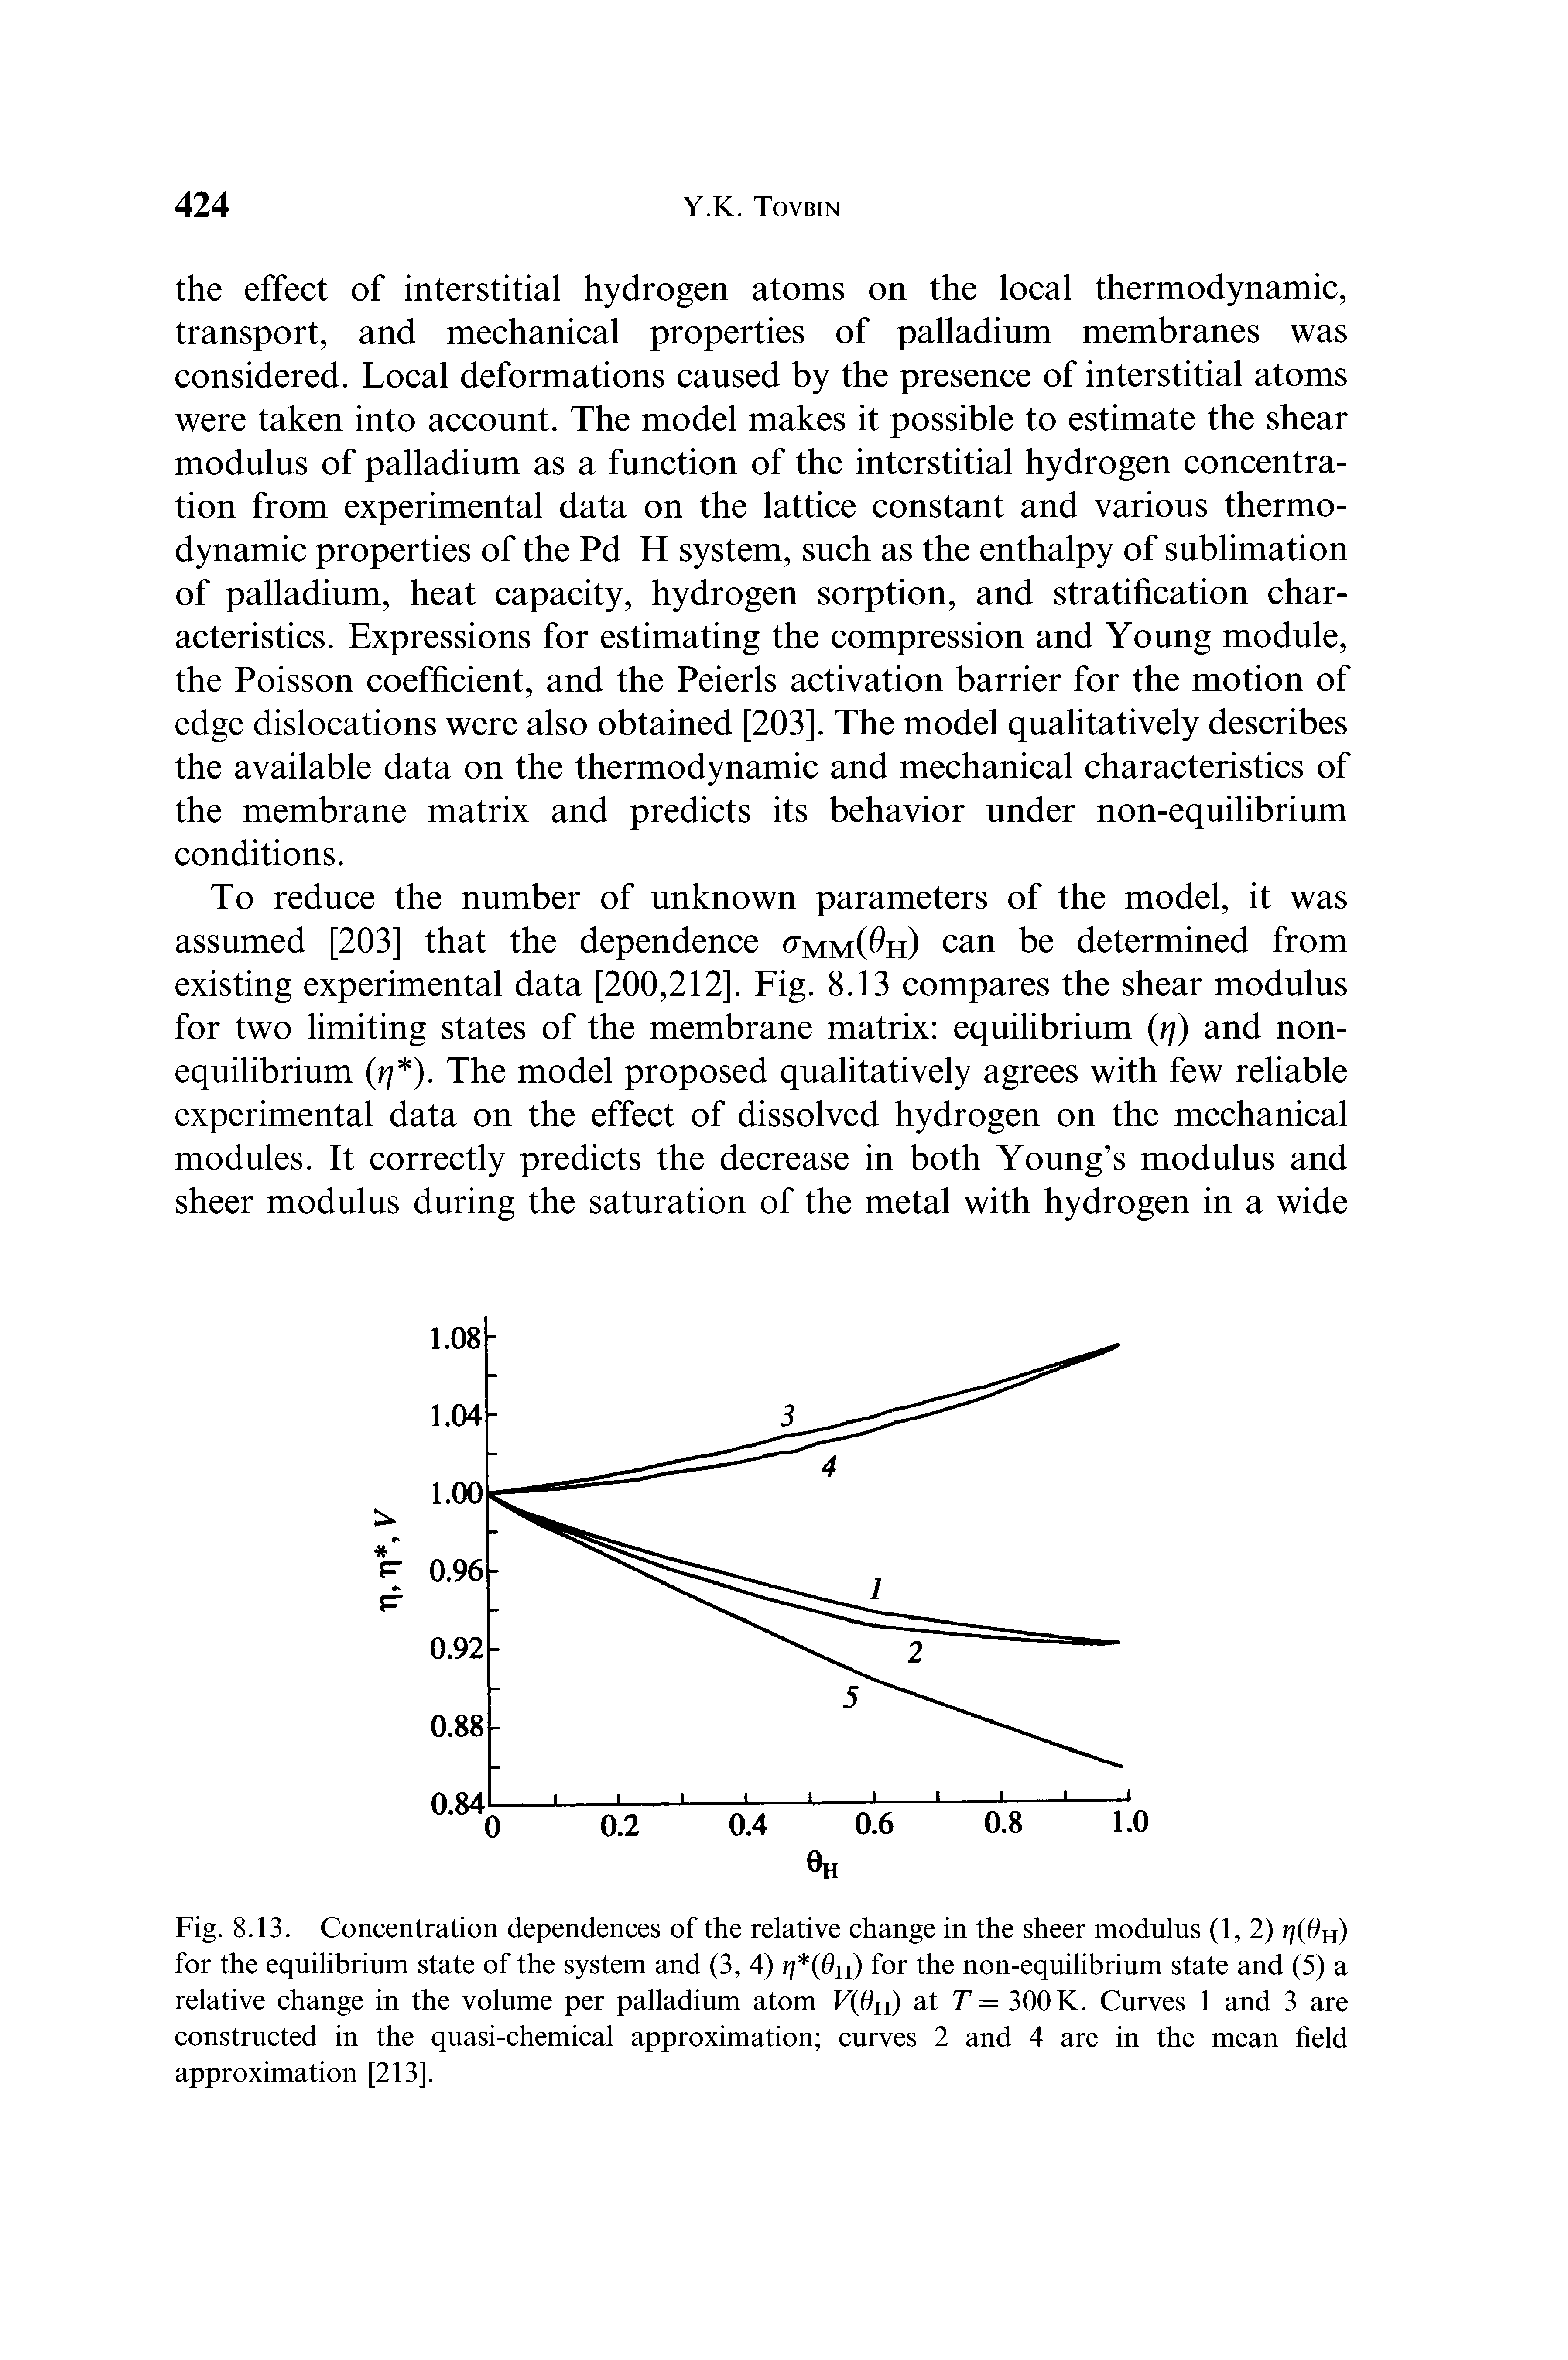 Fig. 8.13. Concentration dependences of the relative change in the sheer modulus (1, 2) tj(6u) for the equilibrium state of the system and (3, 4) rj (9n) for the non-equilibrium state and (5) a relative change in the volume per palladium atom F(0H) at T = 300 K. Curves 1 and 3 are constructed in the quasi-chemical approximation curves 2 and 4 are in the mean field approximation [213].